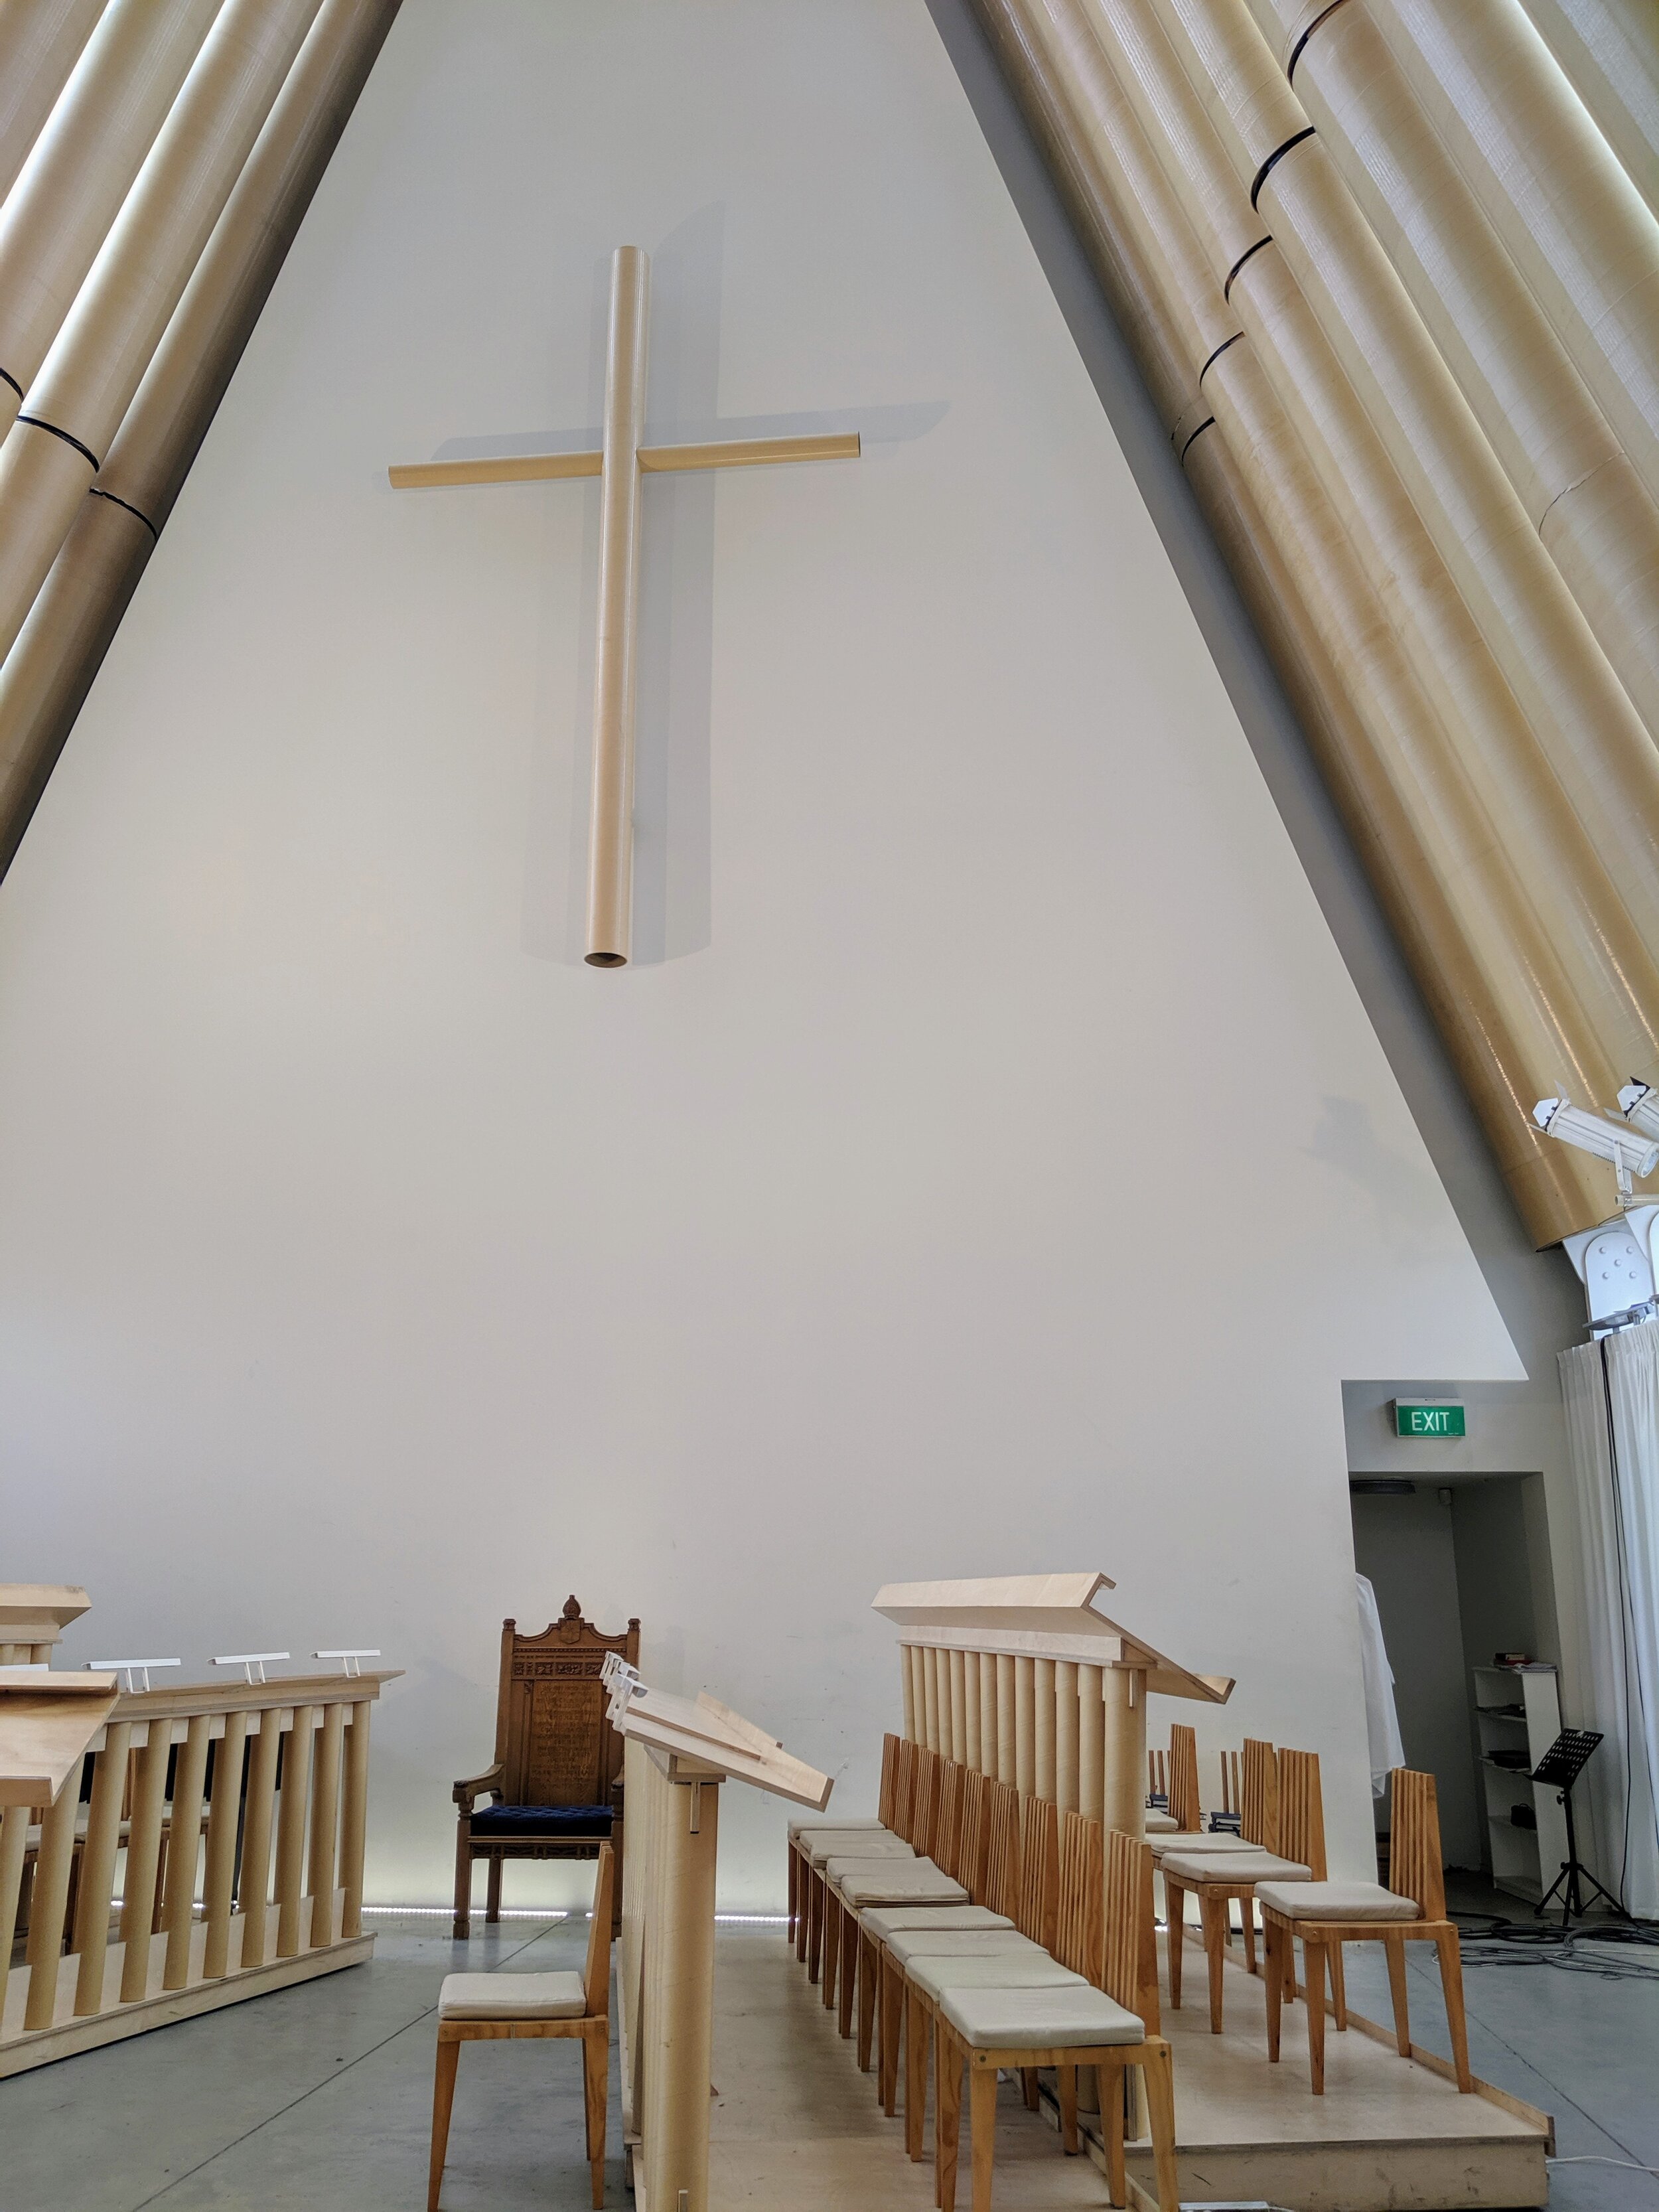  Choral stands, cross, and lecterns made from cardboard tubing in the Cardboard Cathedral in Christchurch. 